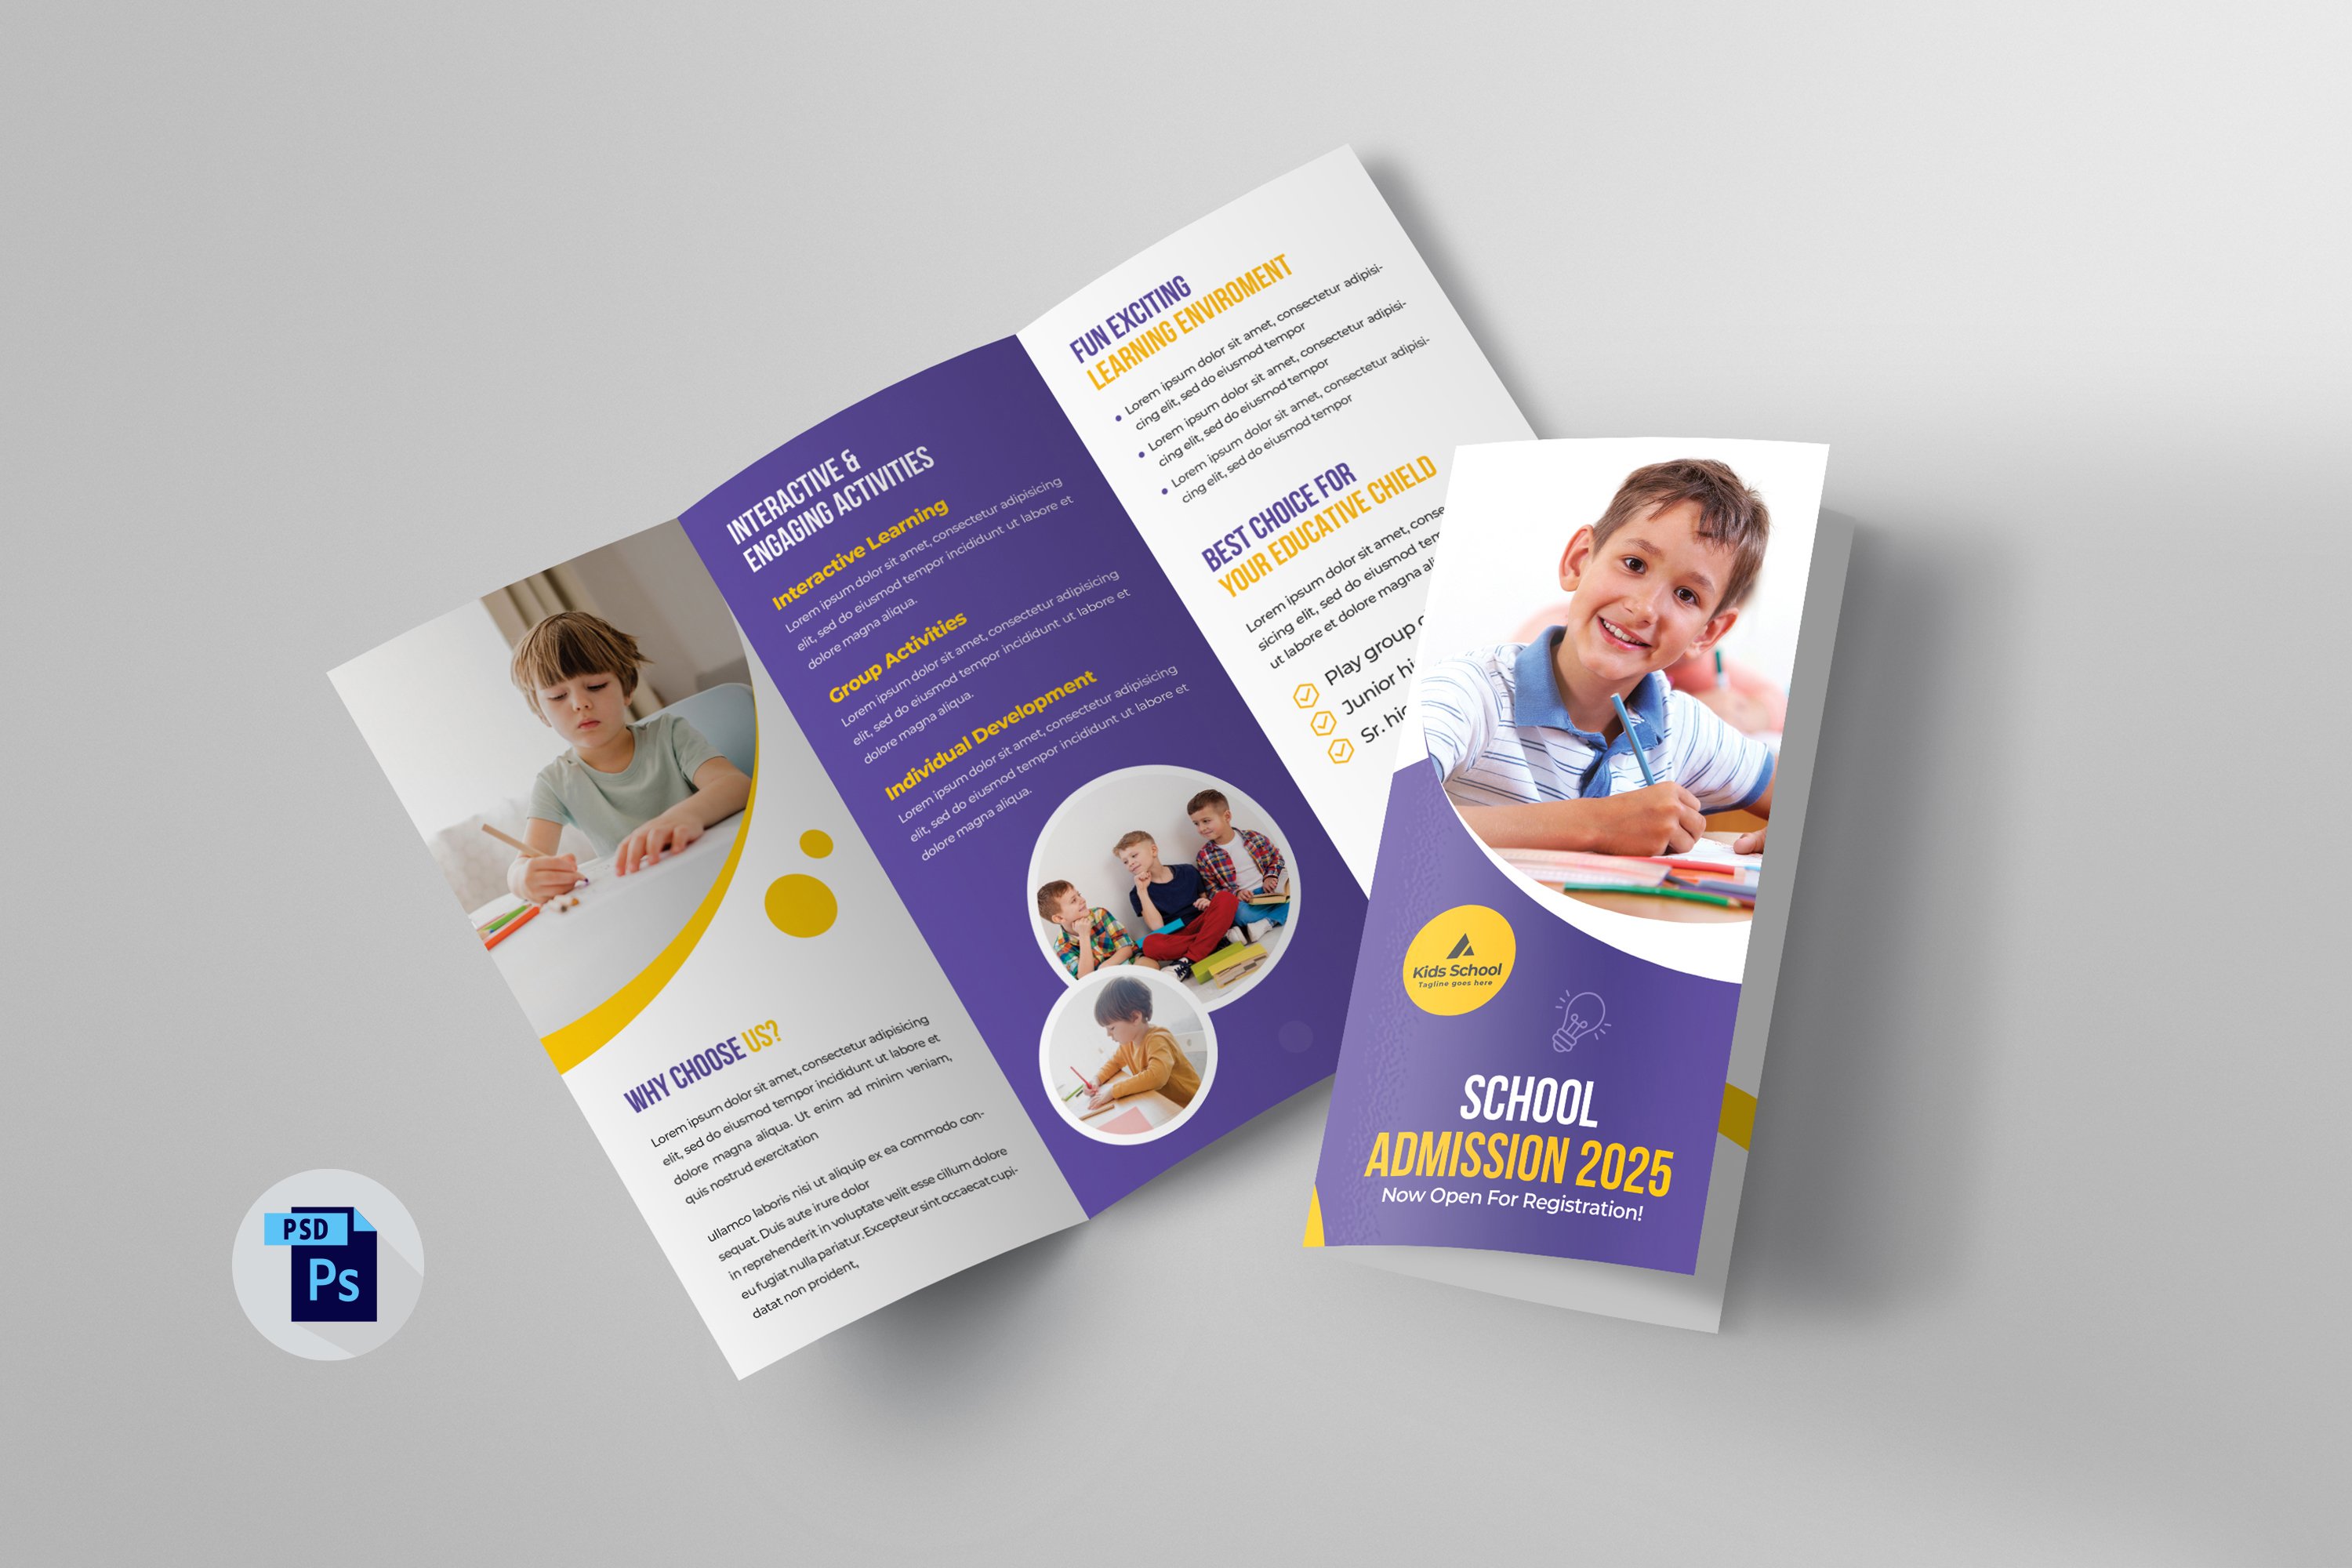 School Admission Trifold Brochure cover image.